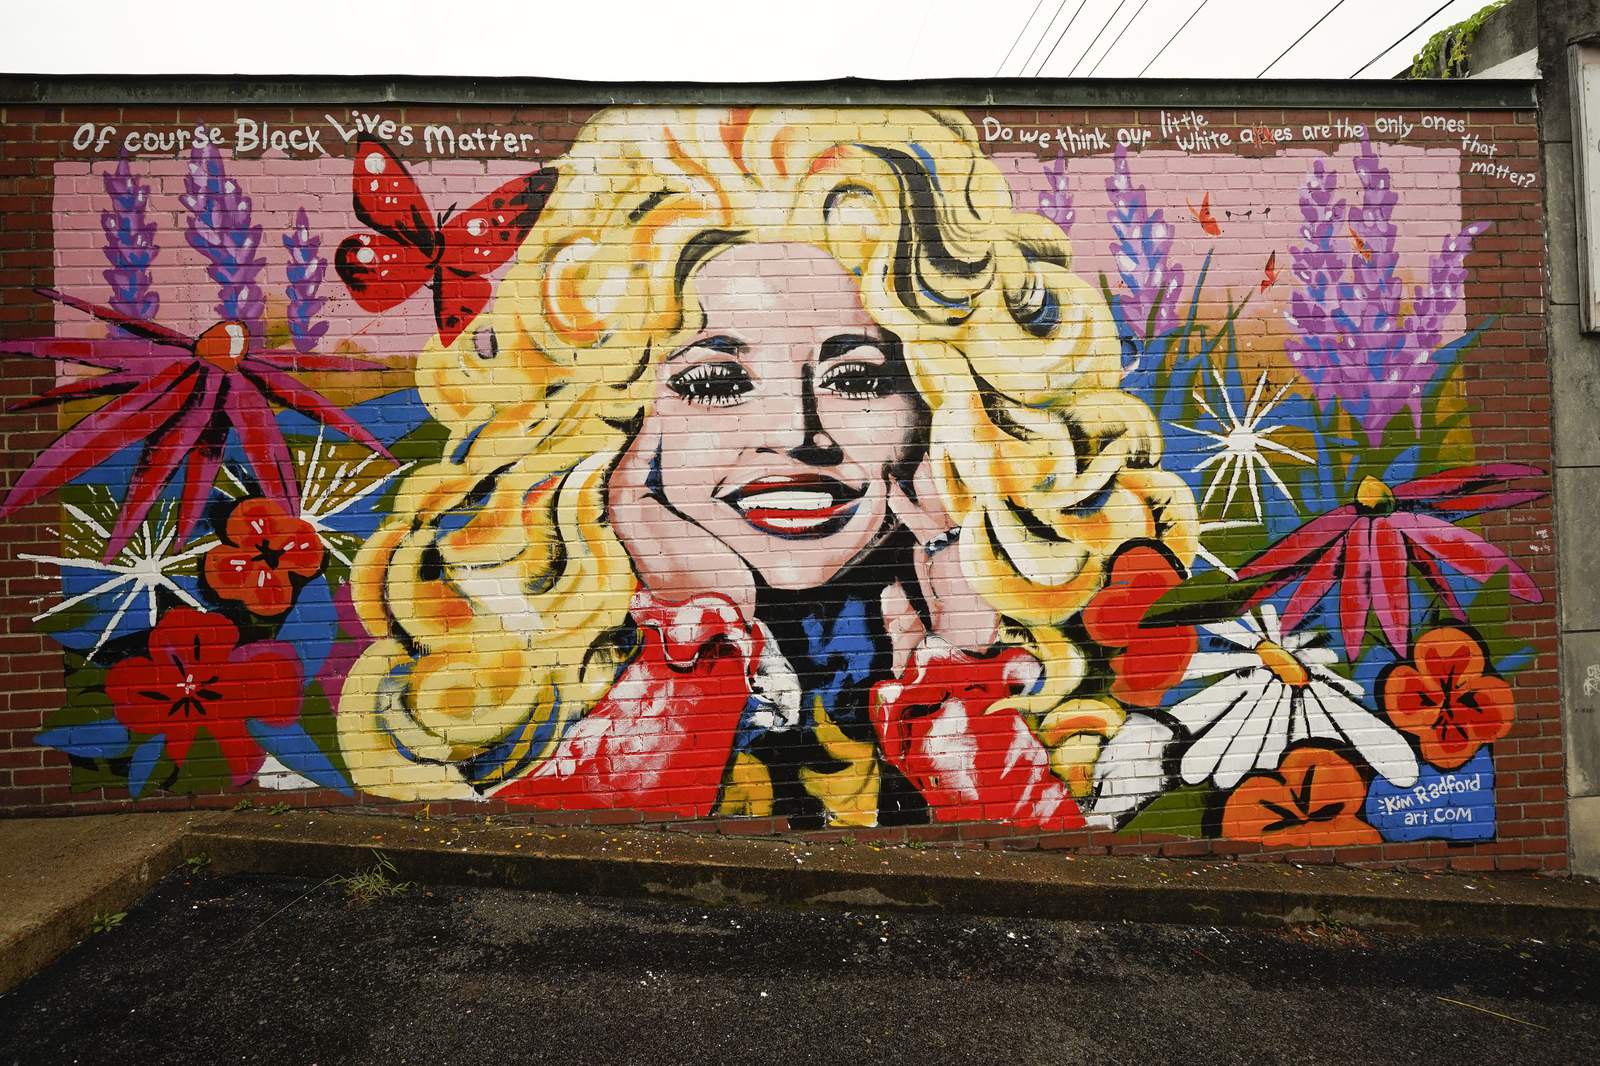 Mural highlights Dolly Parton's Black Lives Matter quote